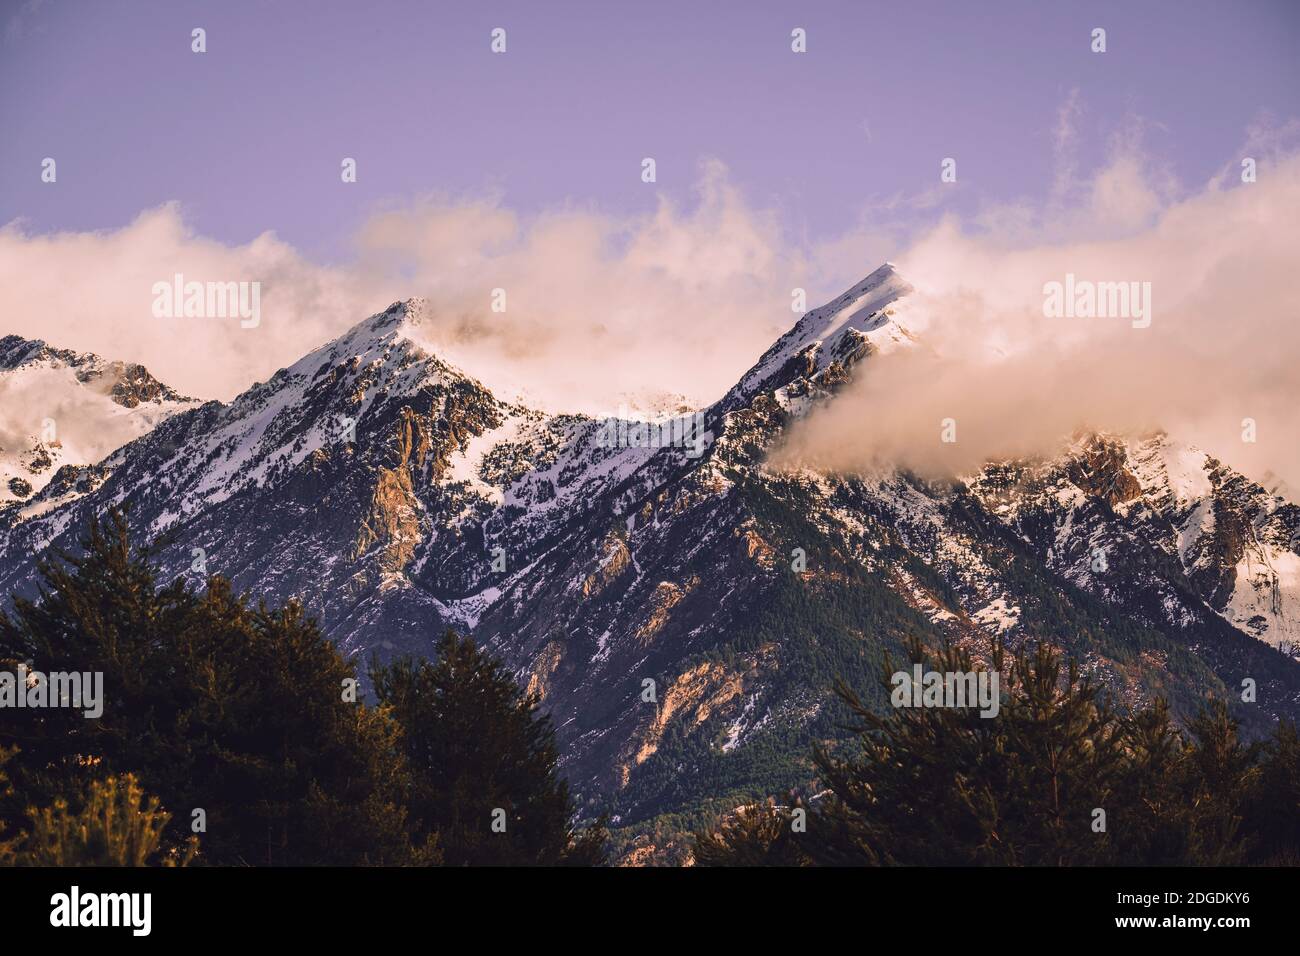 Scenic view of snowcapped mountains against cloudy sky in the Pyrenees at sunrise, Panticosa, Huesca, Spain Stock Photo